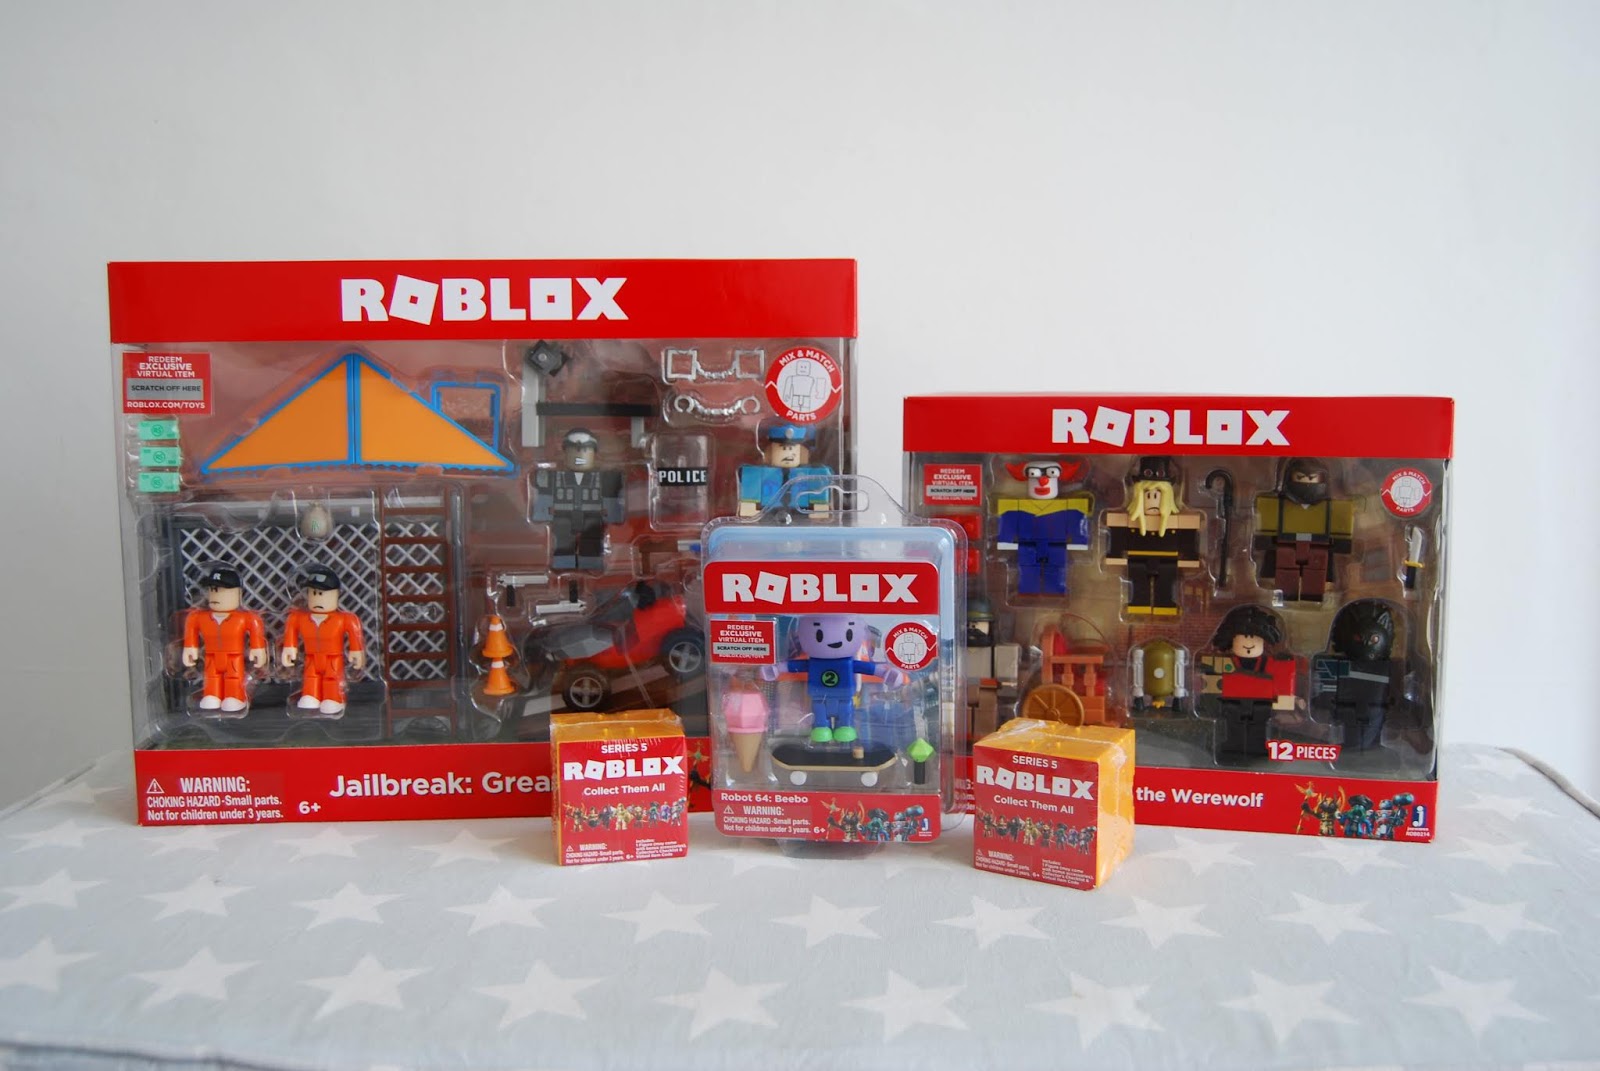 Chic Geek Diary Roblox Series 5 Toys Review Giveaway - how to break out of handcuffs roblox jailbreak